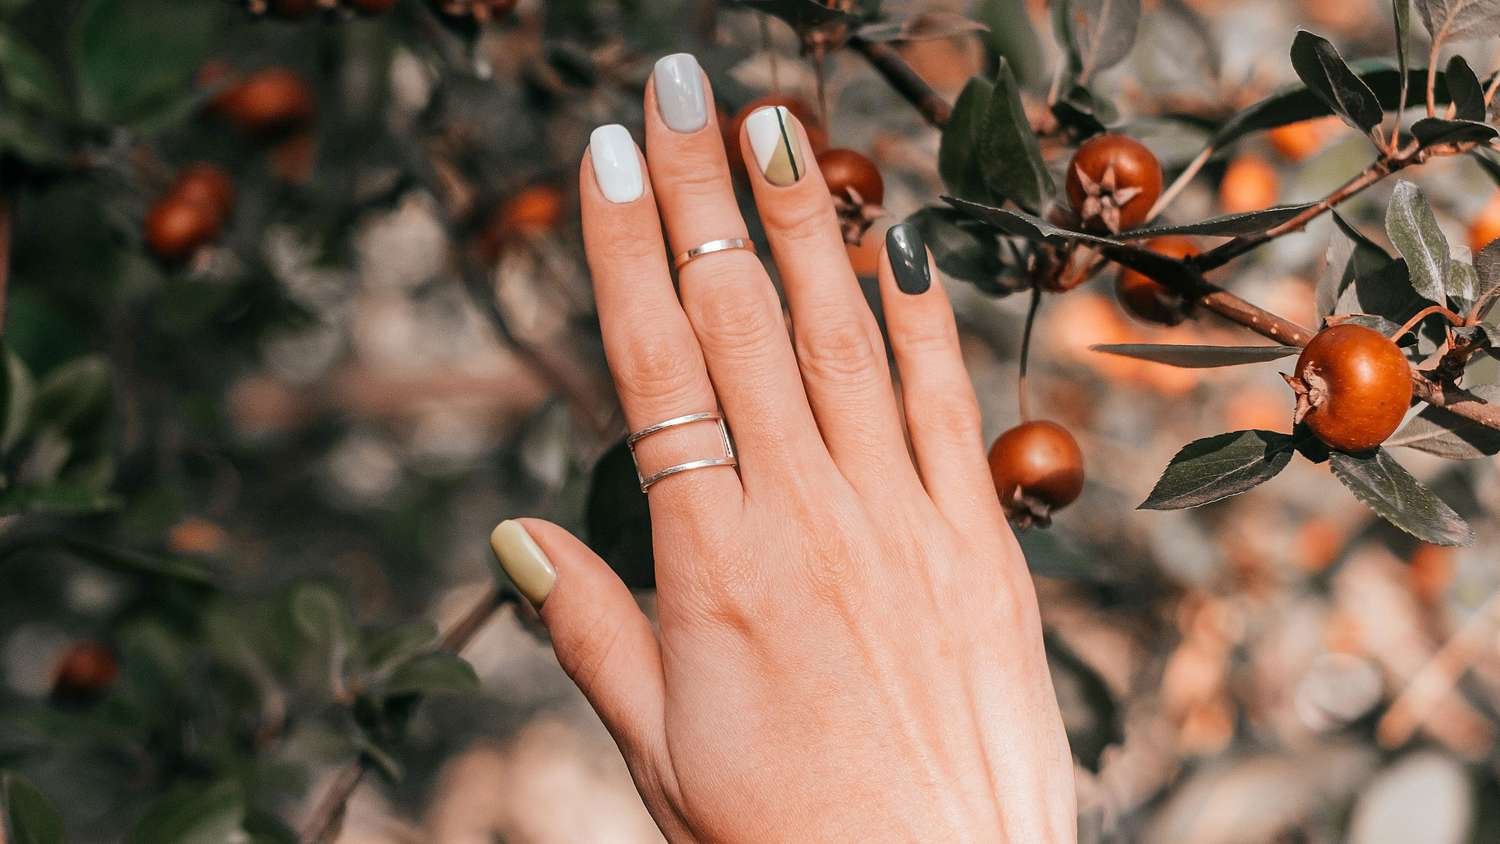 There's an Astrological Reason Why Your Sign Should Wear This One Nail Color for Capricorn Season